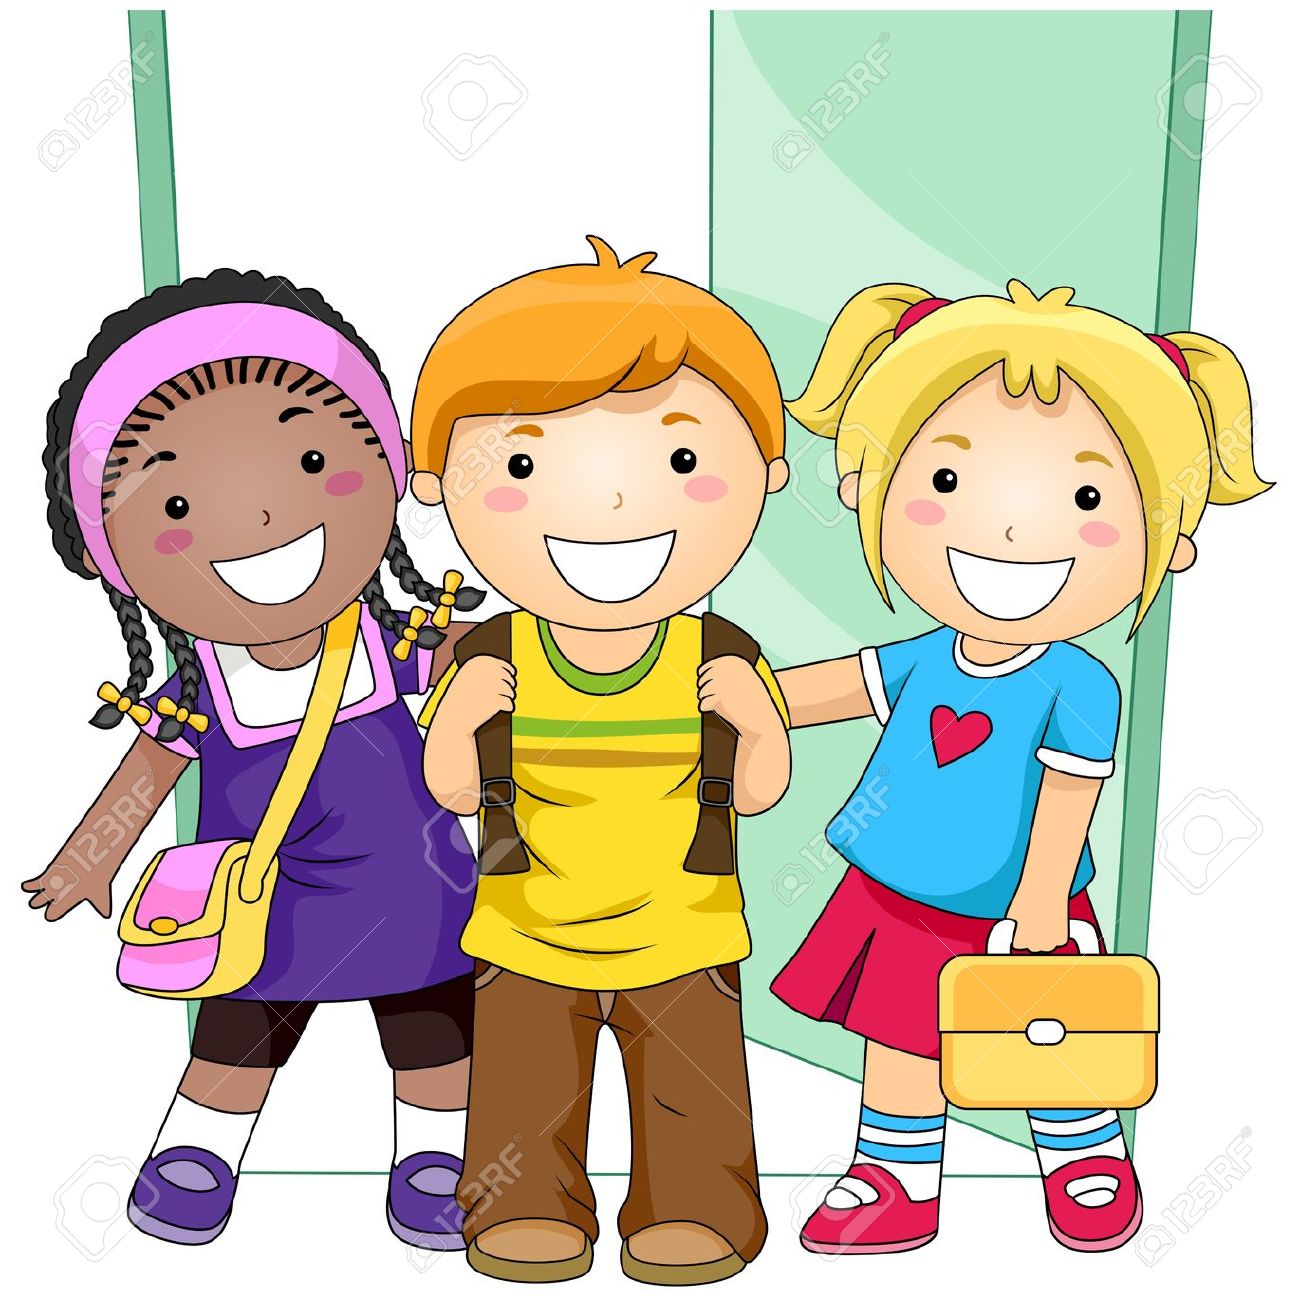 Students In A Classroom Clipart.